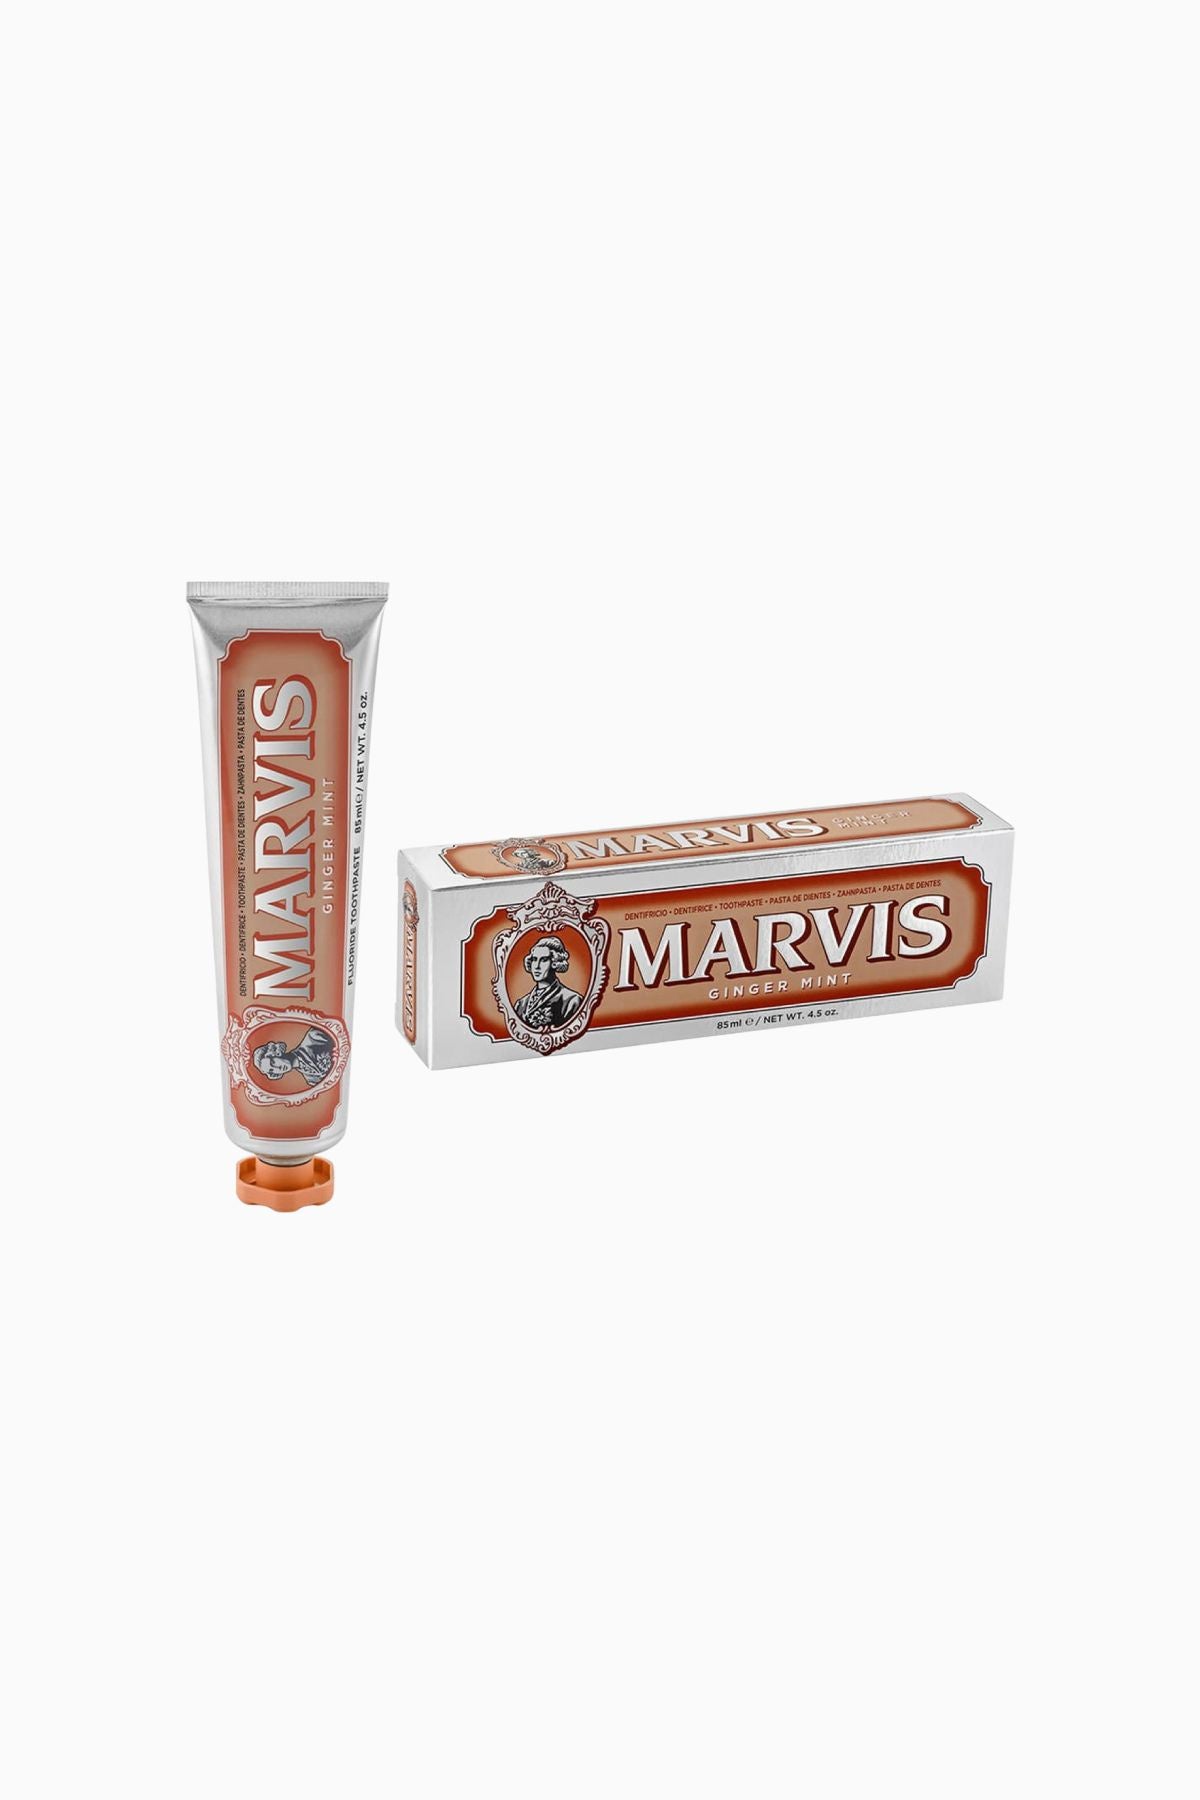 Marvis Toothpaste - Ginger Mint